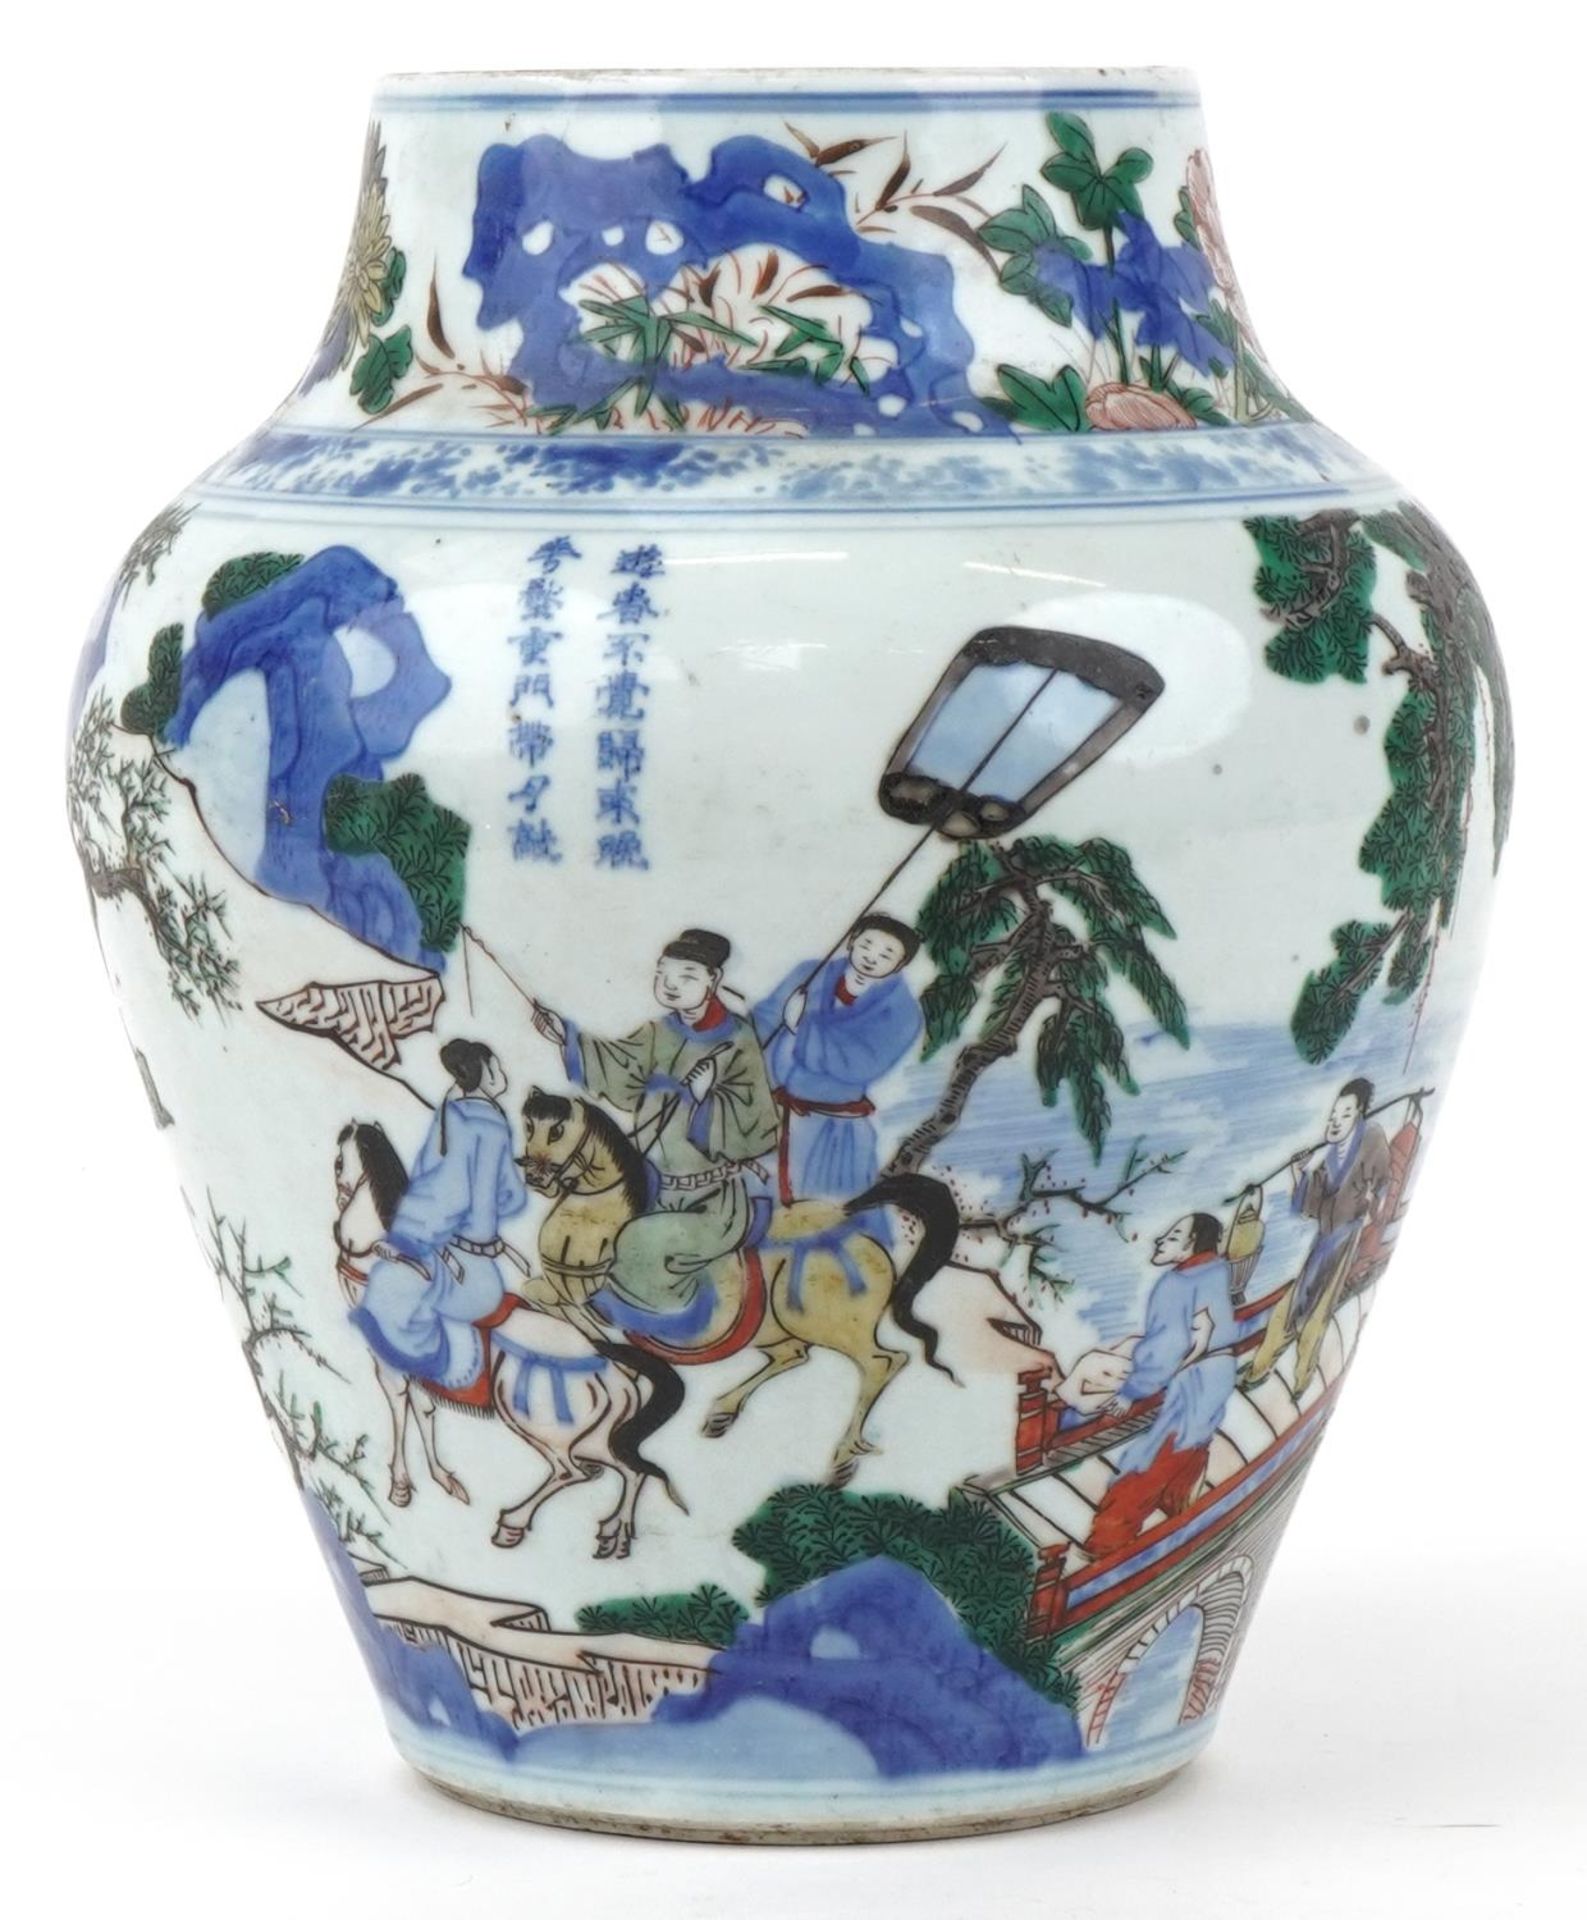 Large Chinese doucai porcelain vase hand painted with a figure on horseback and attendants - Image 3 of 7